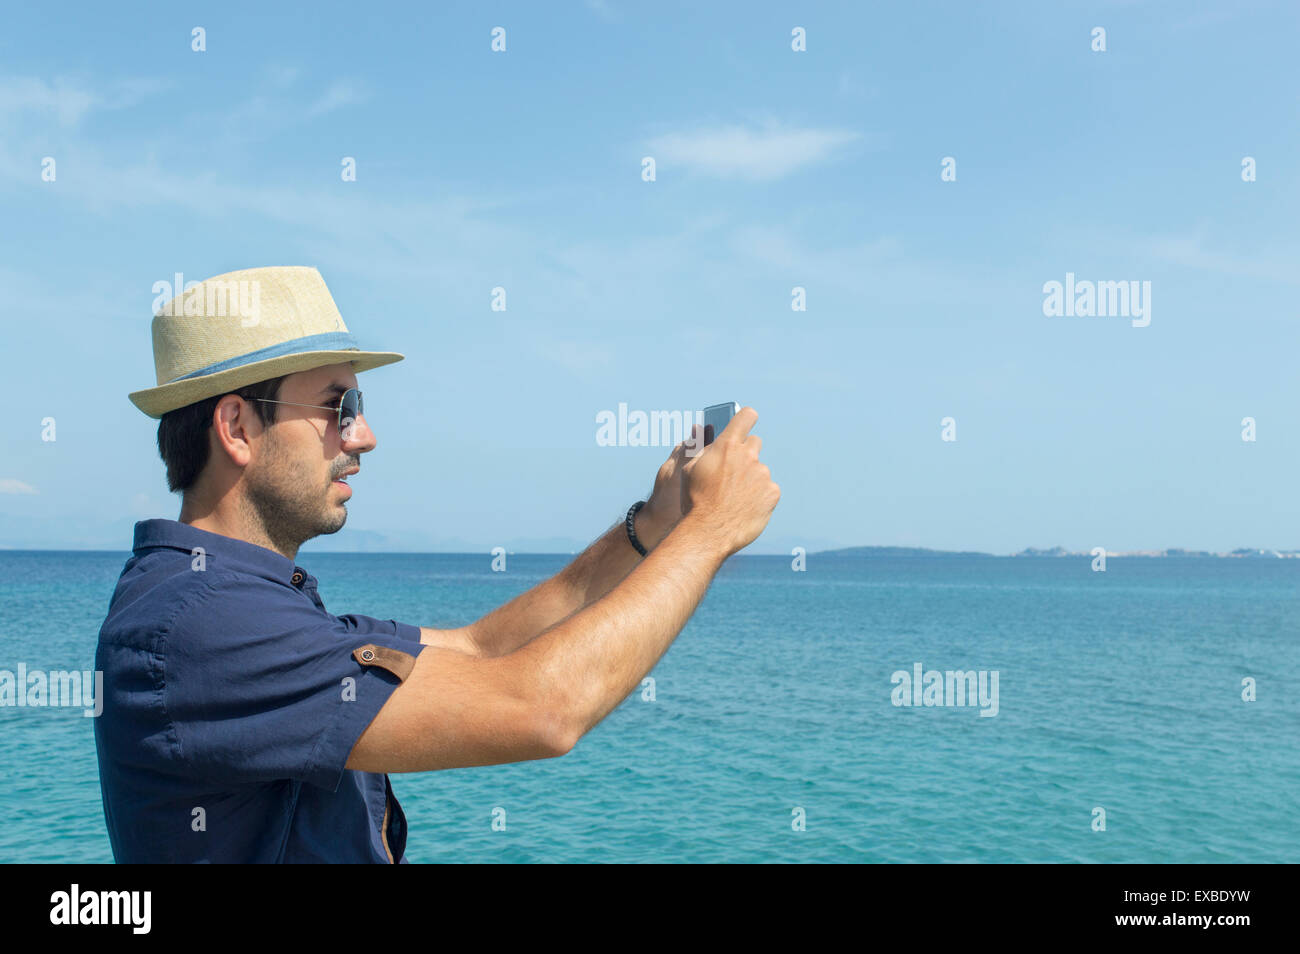 Man taking photos with his cell phone at the sea Stock Photo